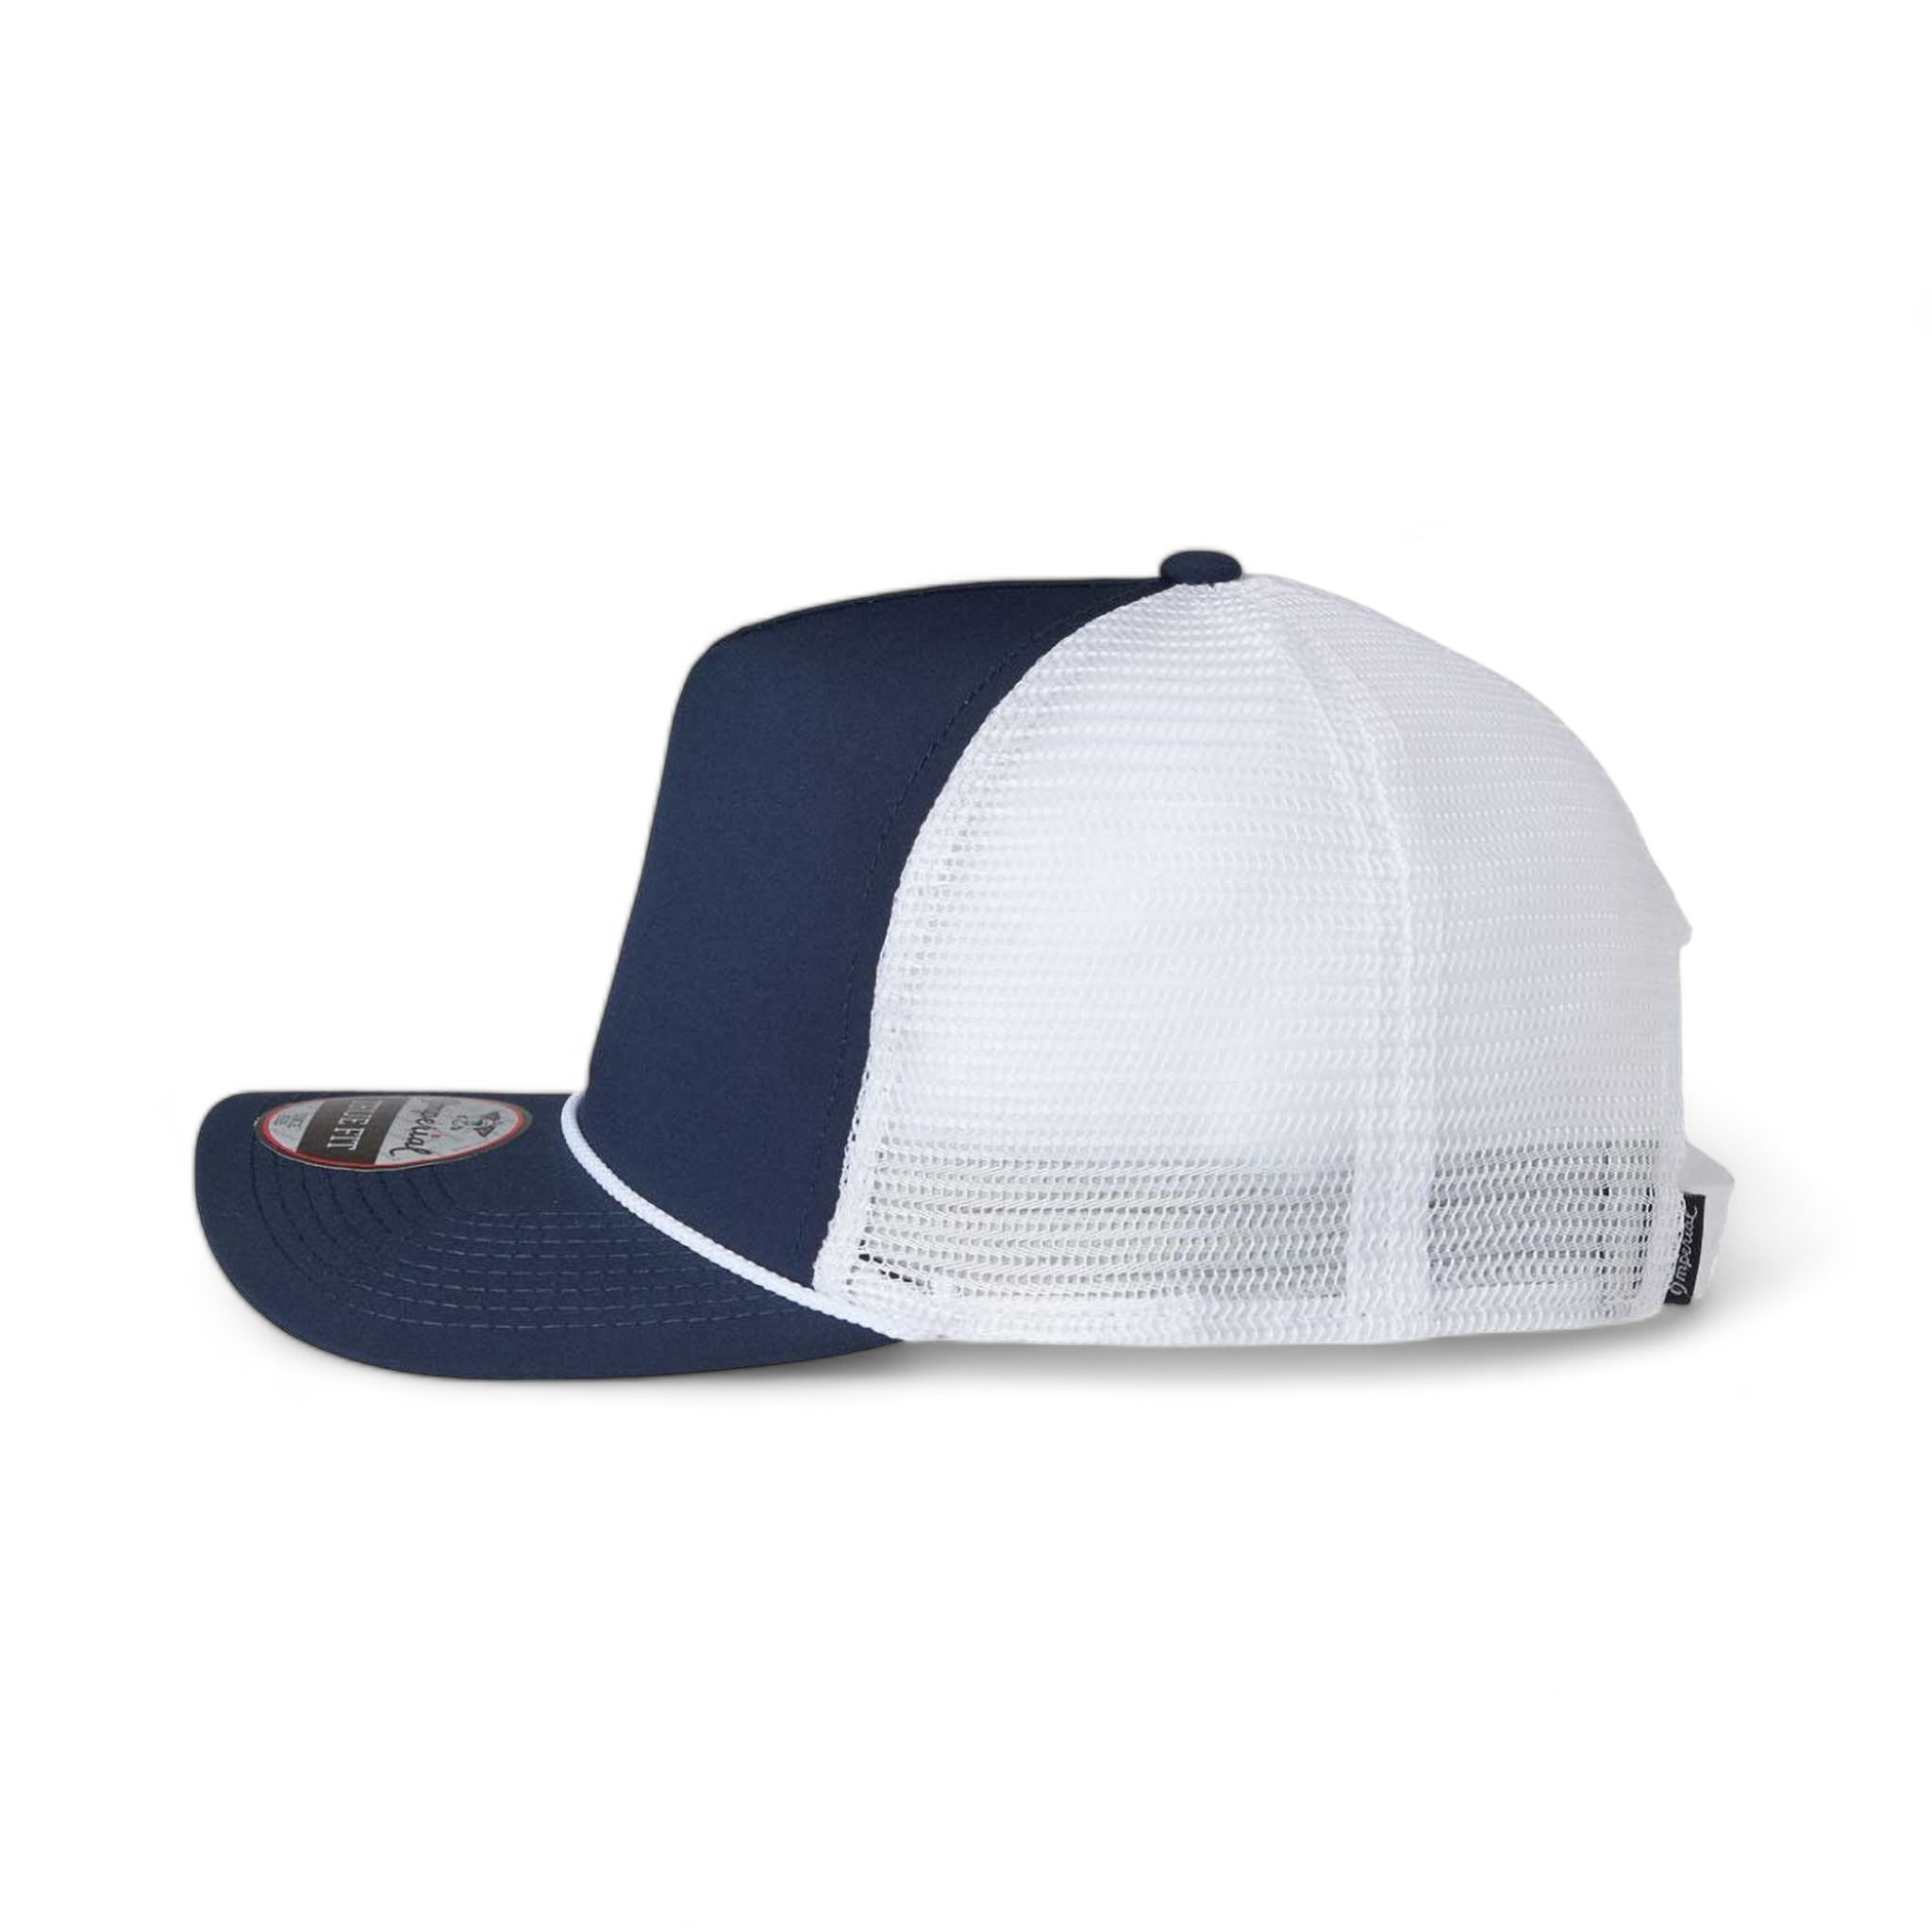 Side view of Imperial 5055 custom hat in navy, white and white